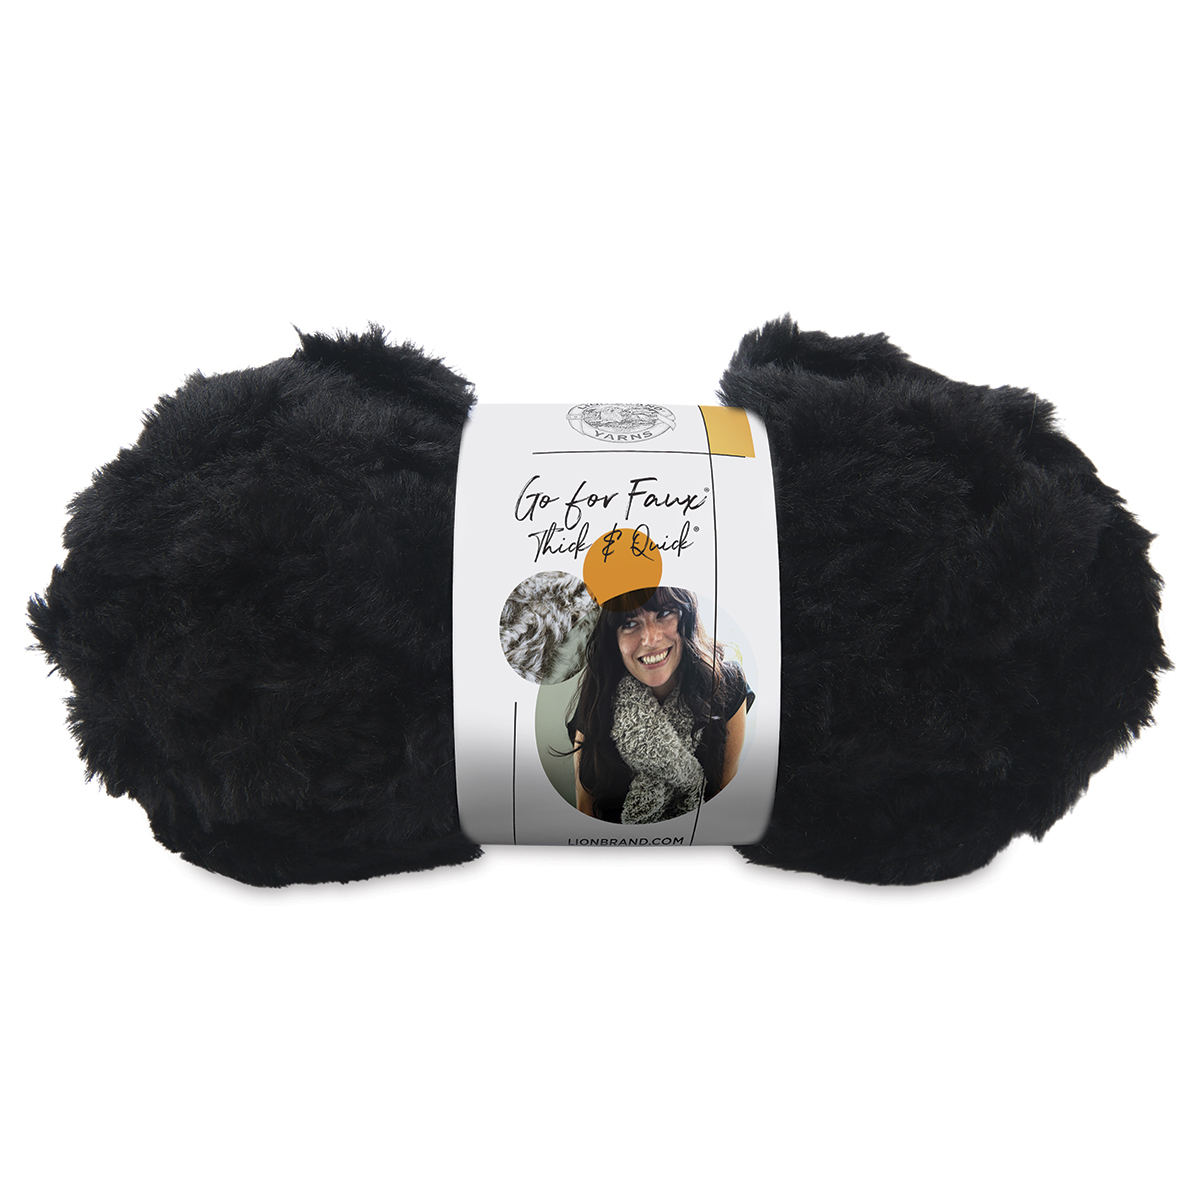 Lion Brand Go For Faux Thick And Quick Yarn - Black Panther, 24